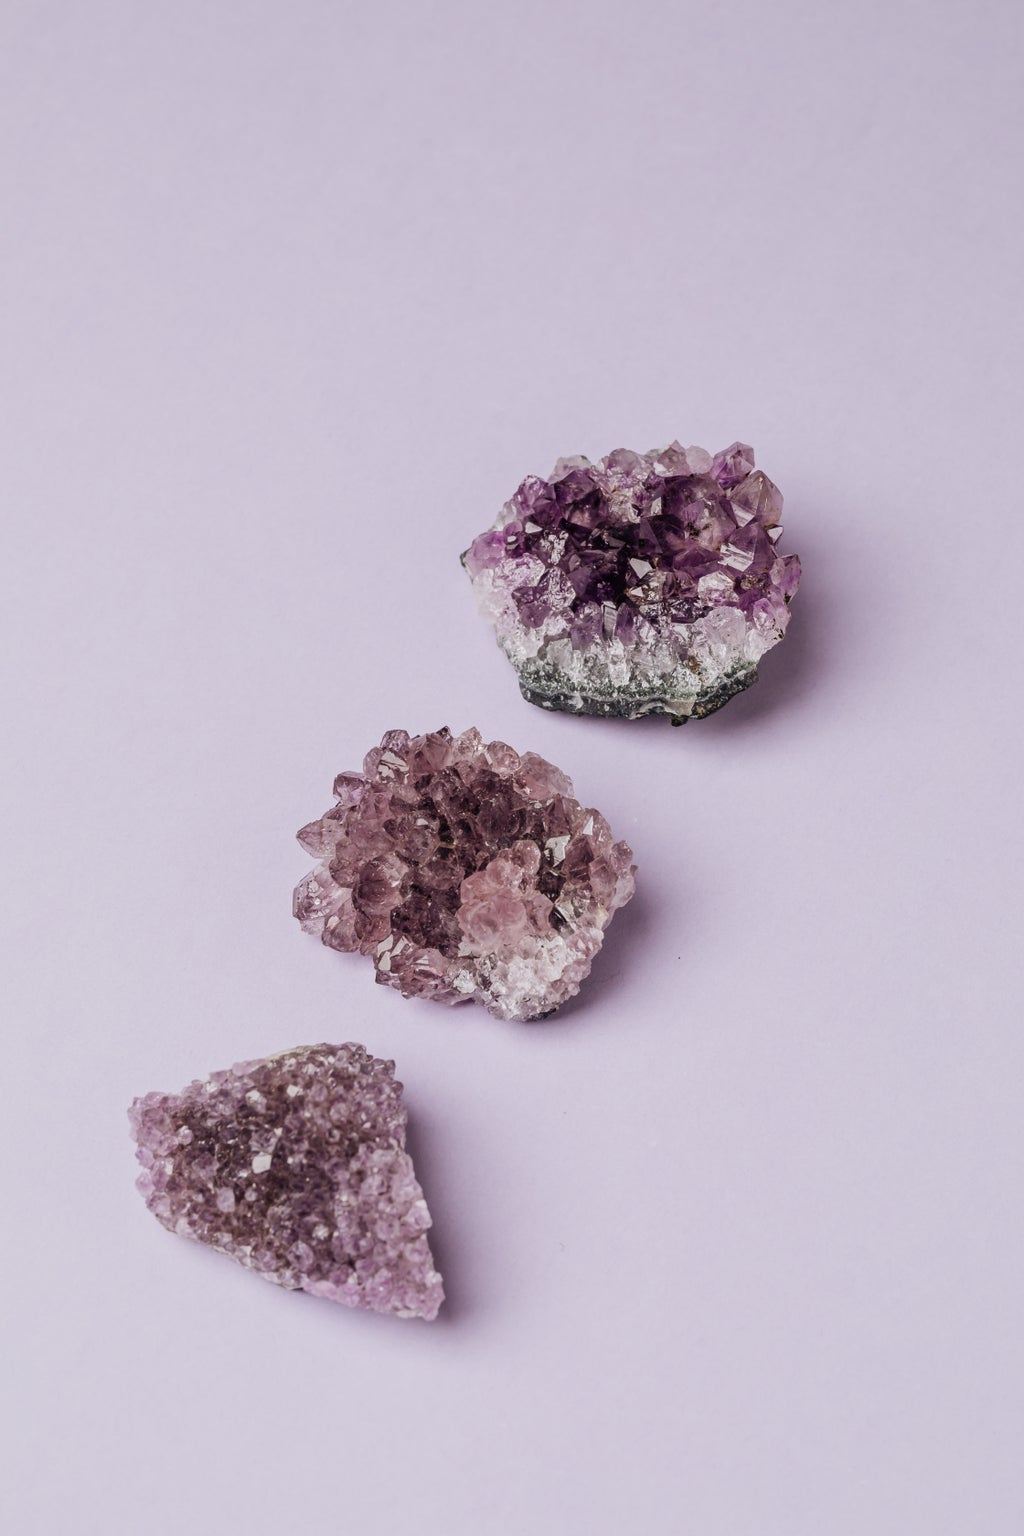 Crystals For School Purple Amethyst?width=1024&height=1024&fit=cover&auto=webp